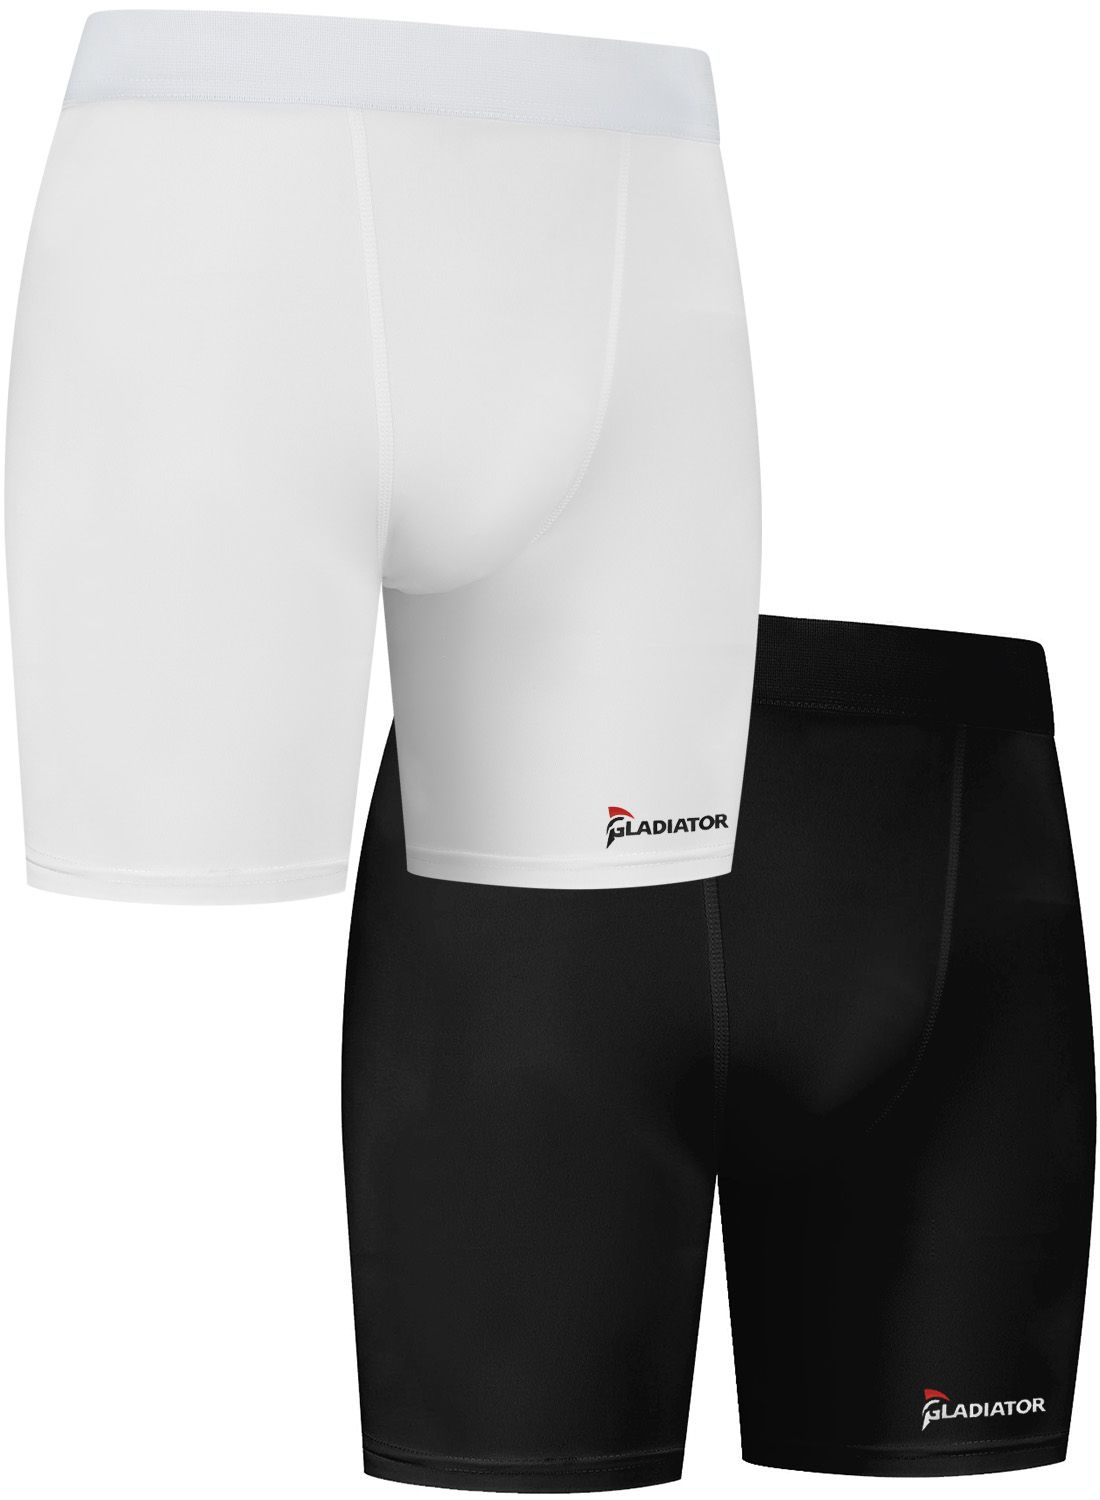 gladiator sports mens compression shorts in black and white for sale